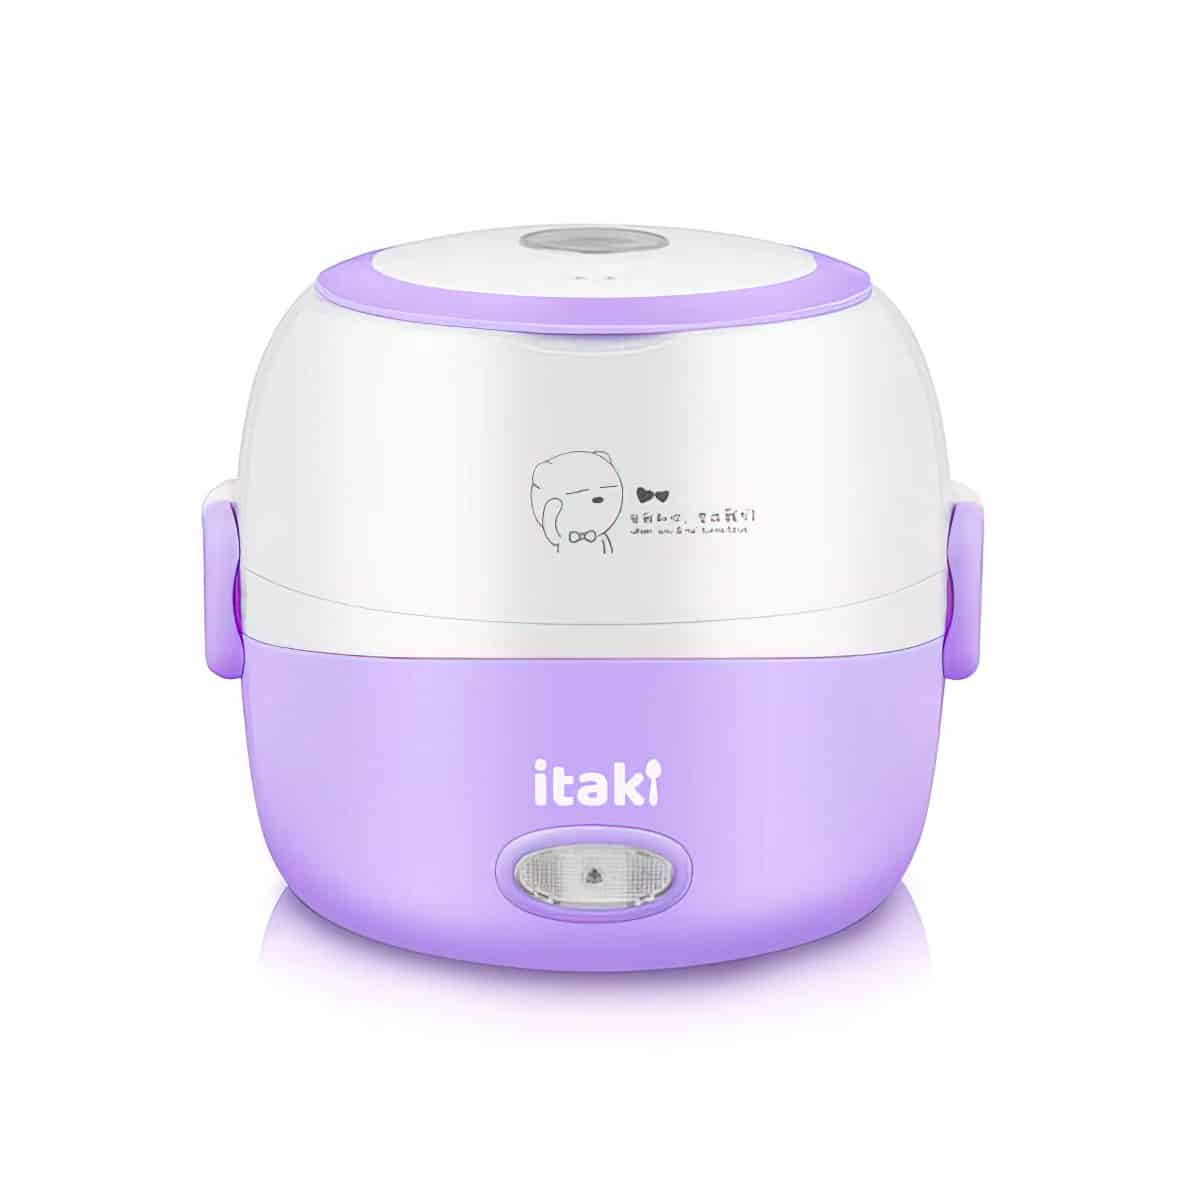 Is it safe to use an electric lunchbox? Pros and Cons of Using an